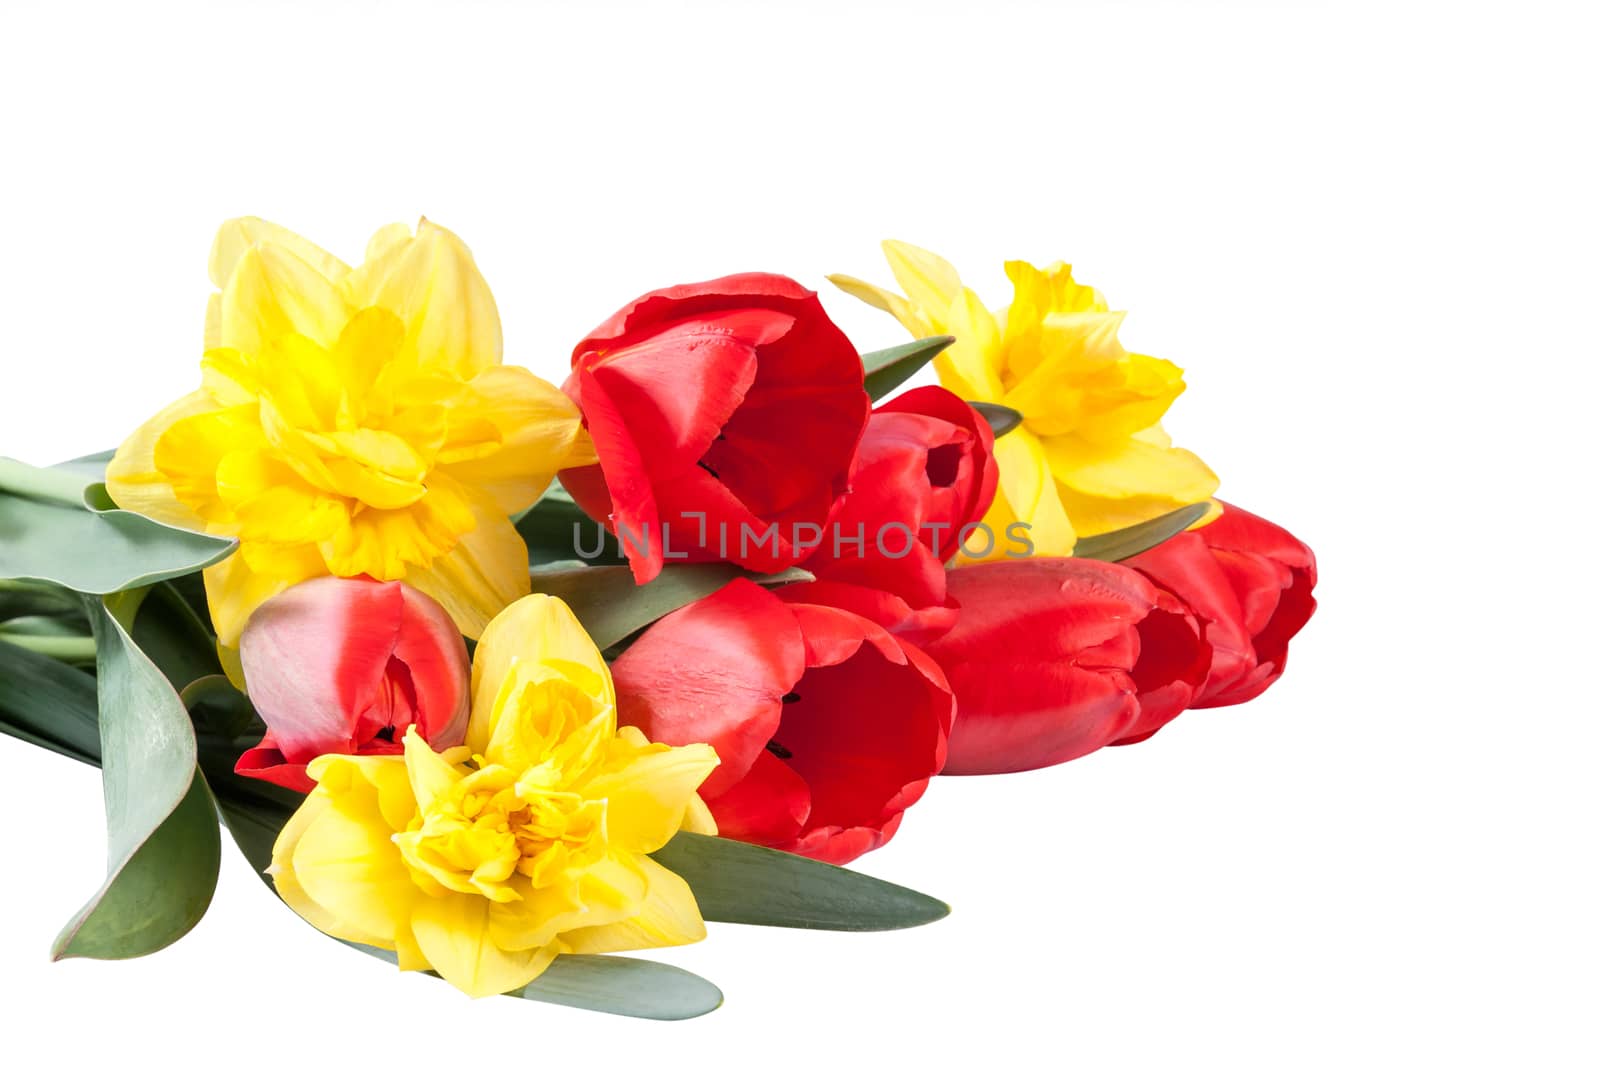 Bouquet of beautiful narcissus and tulips by firewings